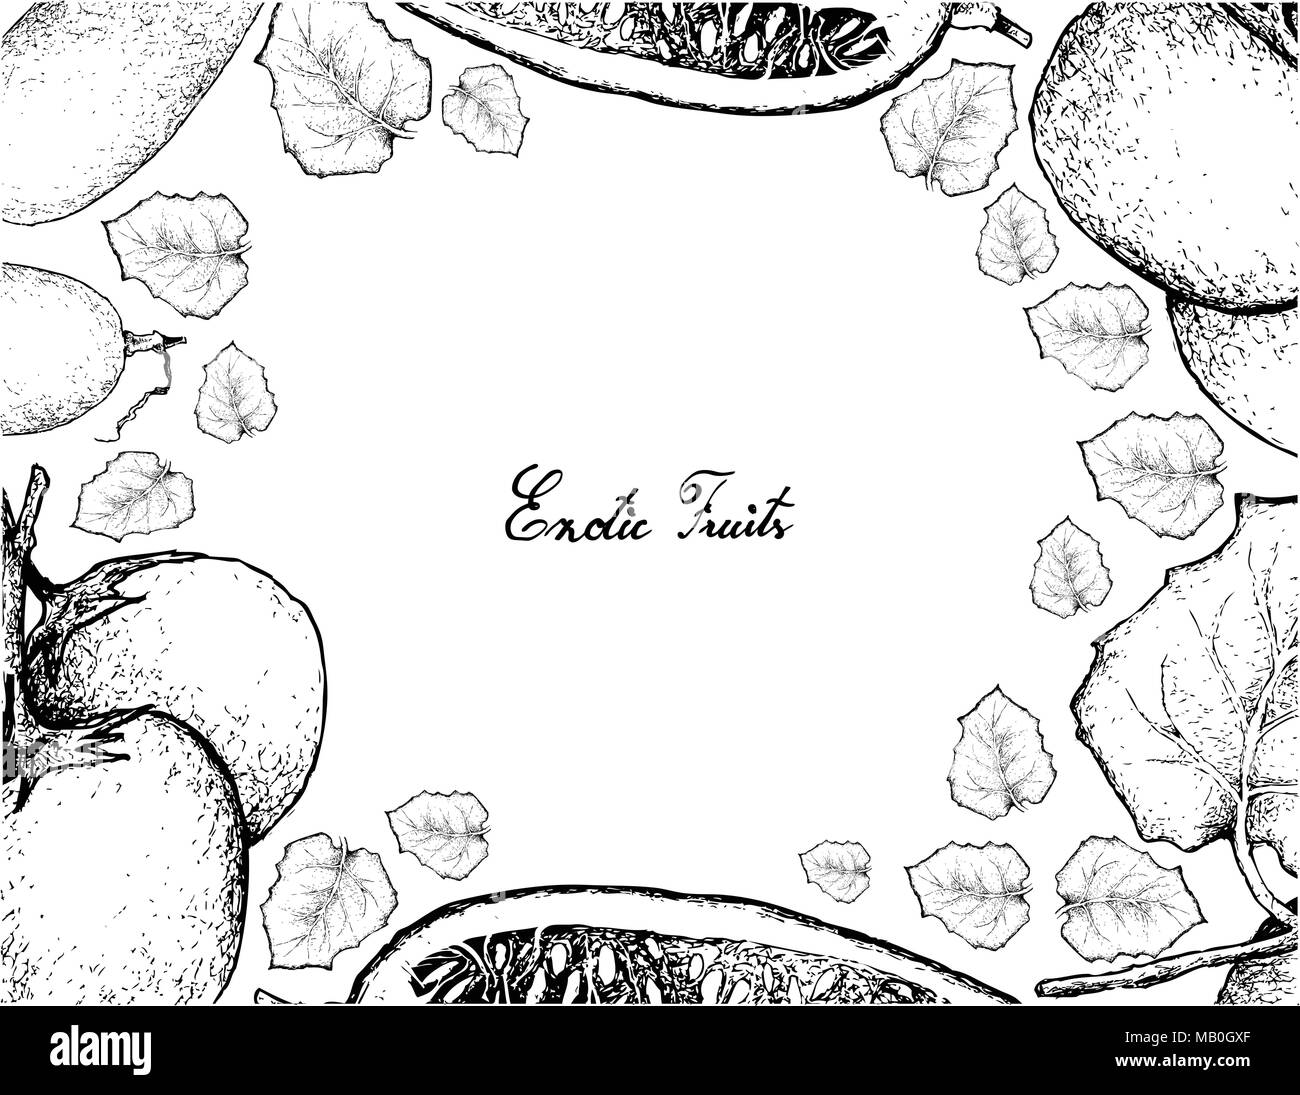 Vegetable and Fruit, Illustration Frame of Hand Drawn Sketch of Cubiu Cocona or Solanum Sessiliflorum and Cassabanana, Musk Cucumber or Sicana Odorife Stock Vector